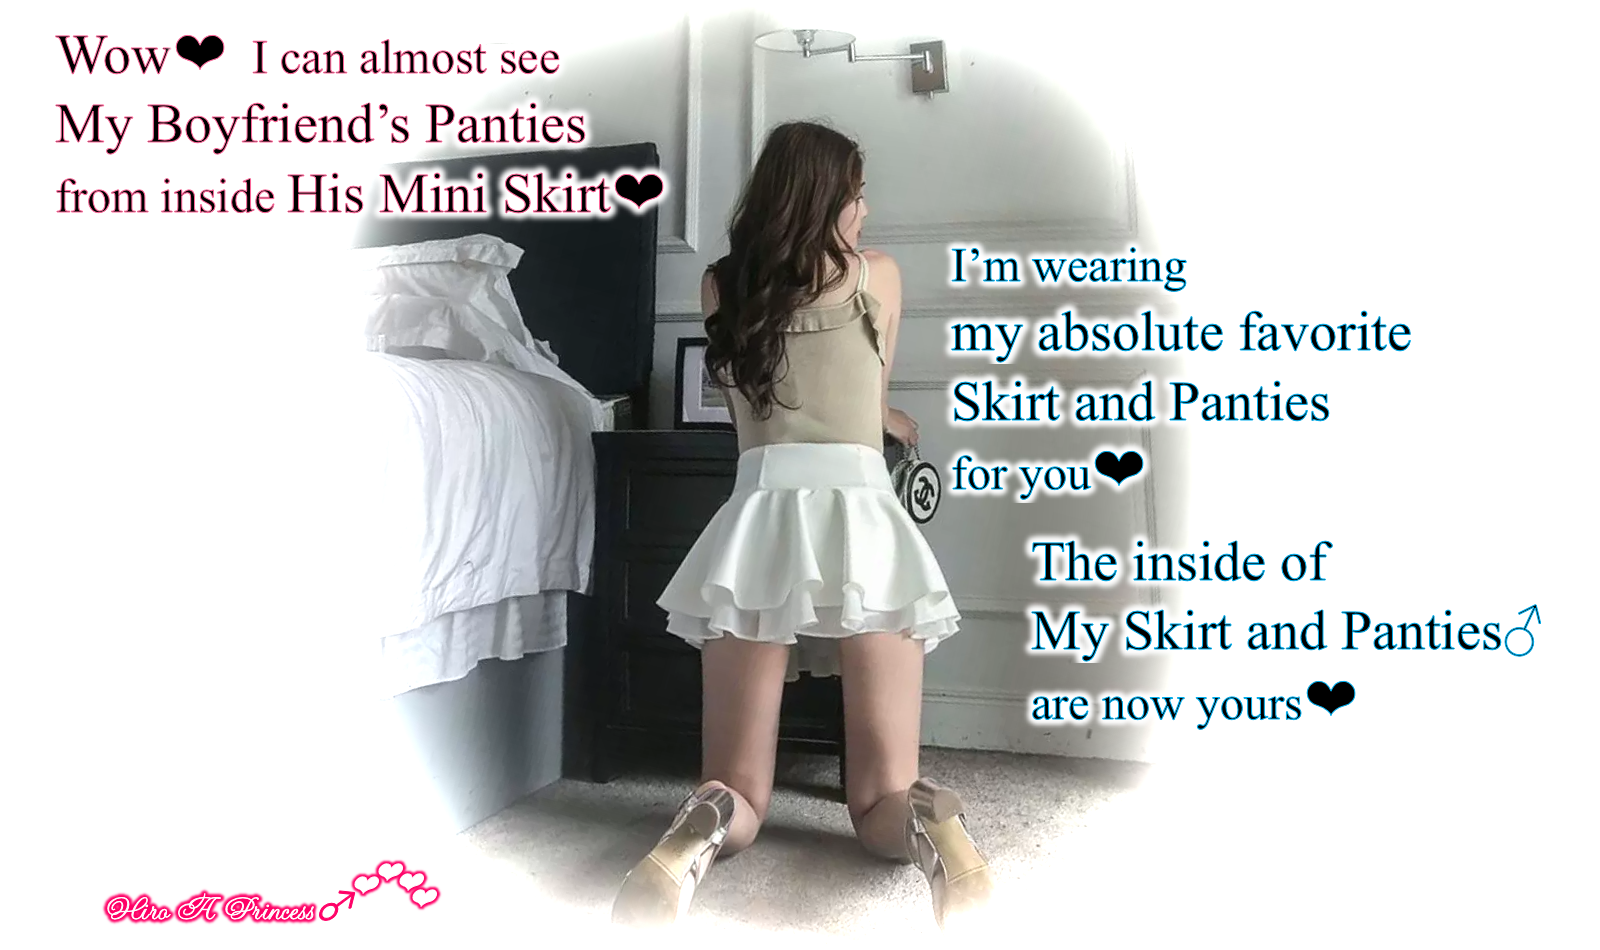 His Panties are almost seen from inside His Mini Skirt E